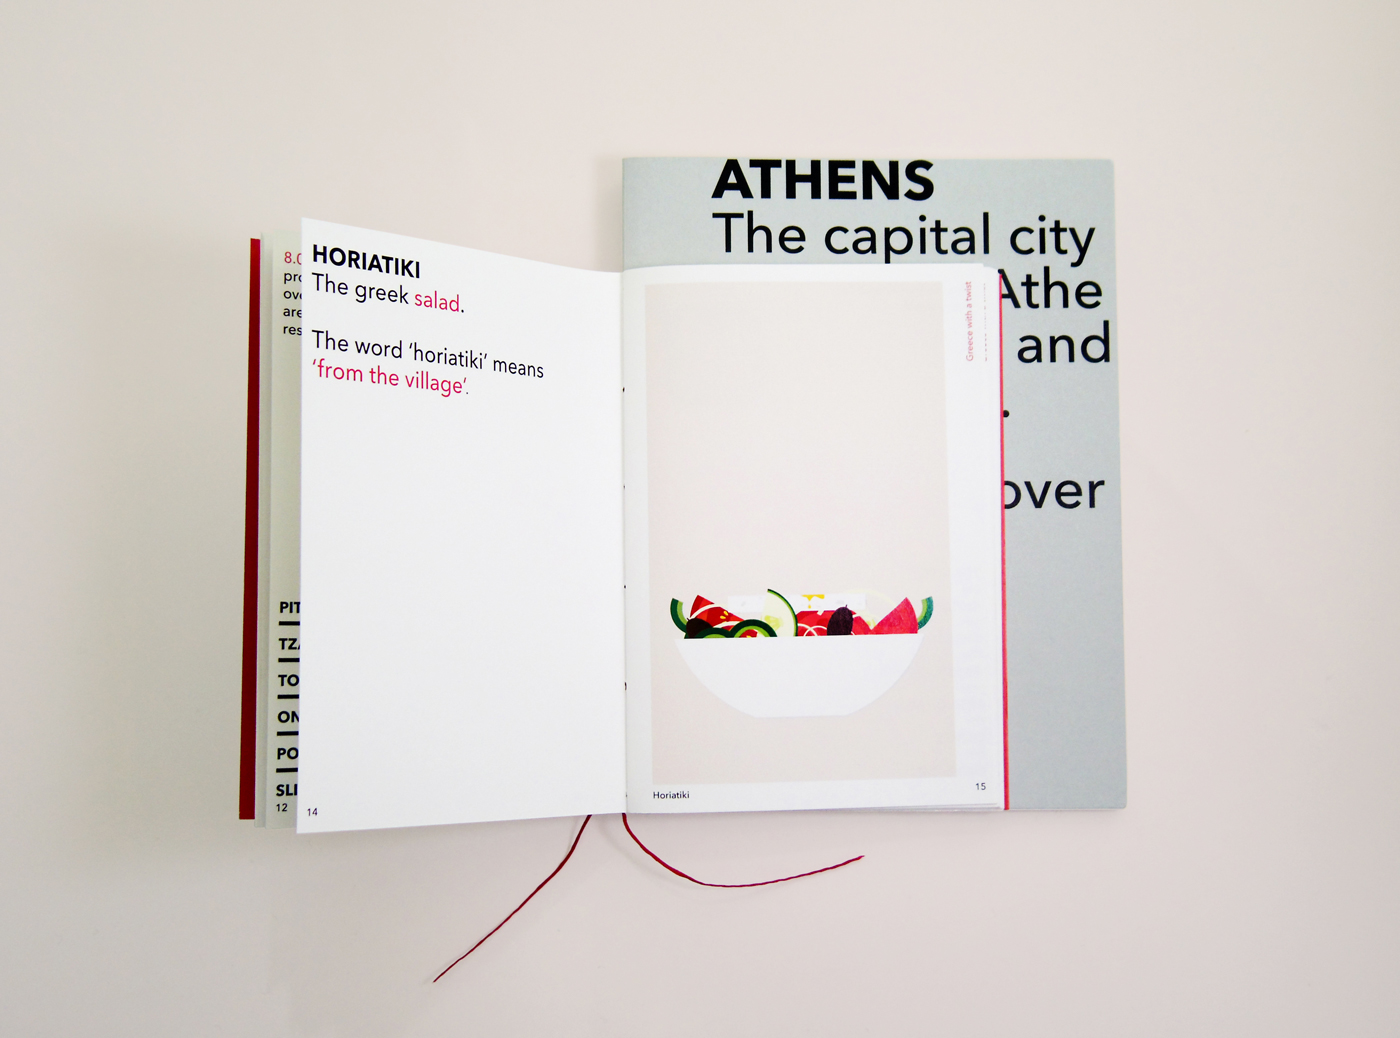 athens Greece copyrightgreece touristic guide greecewithatwist touristic tourist information poster book cards Website bags editorial Layout